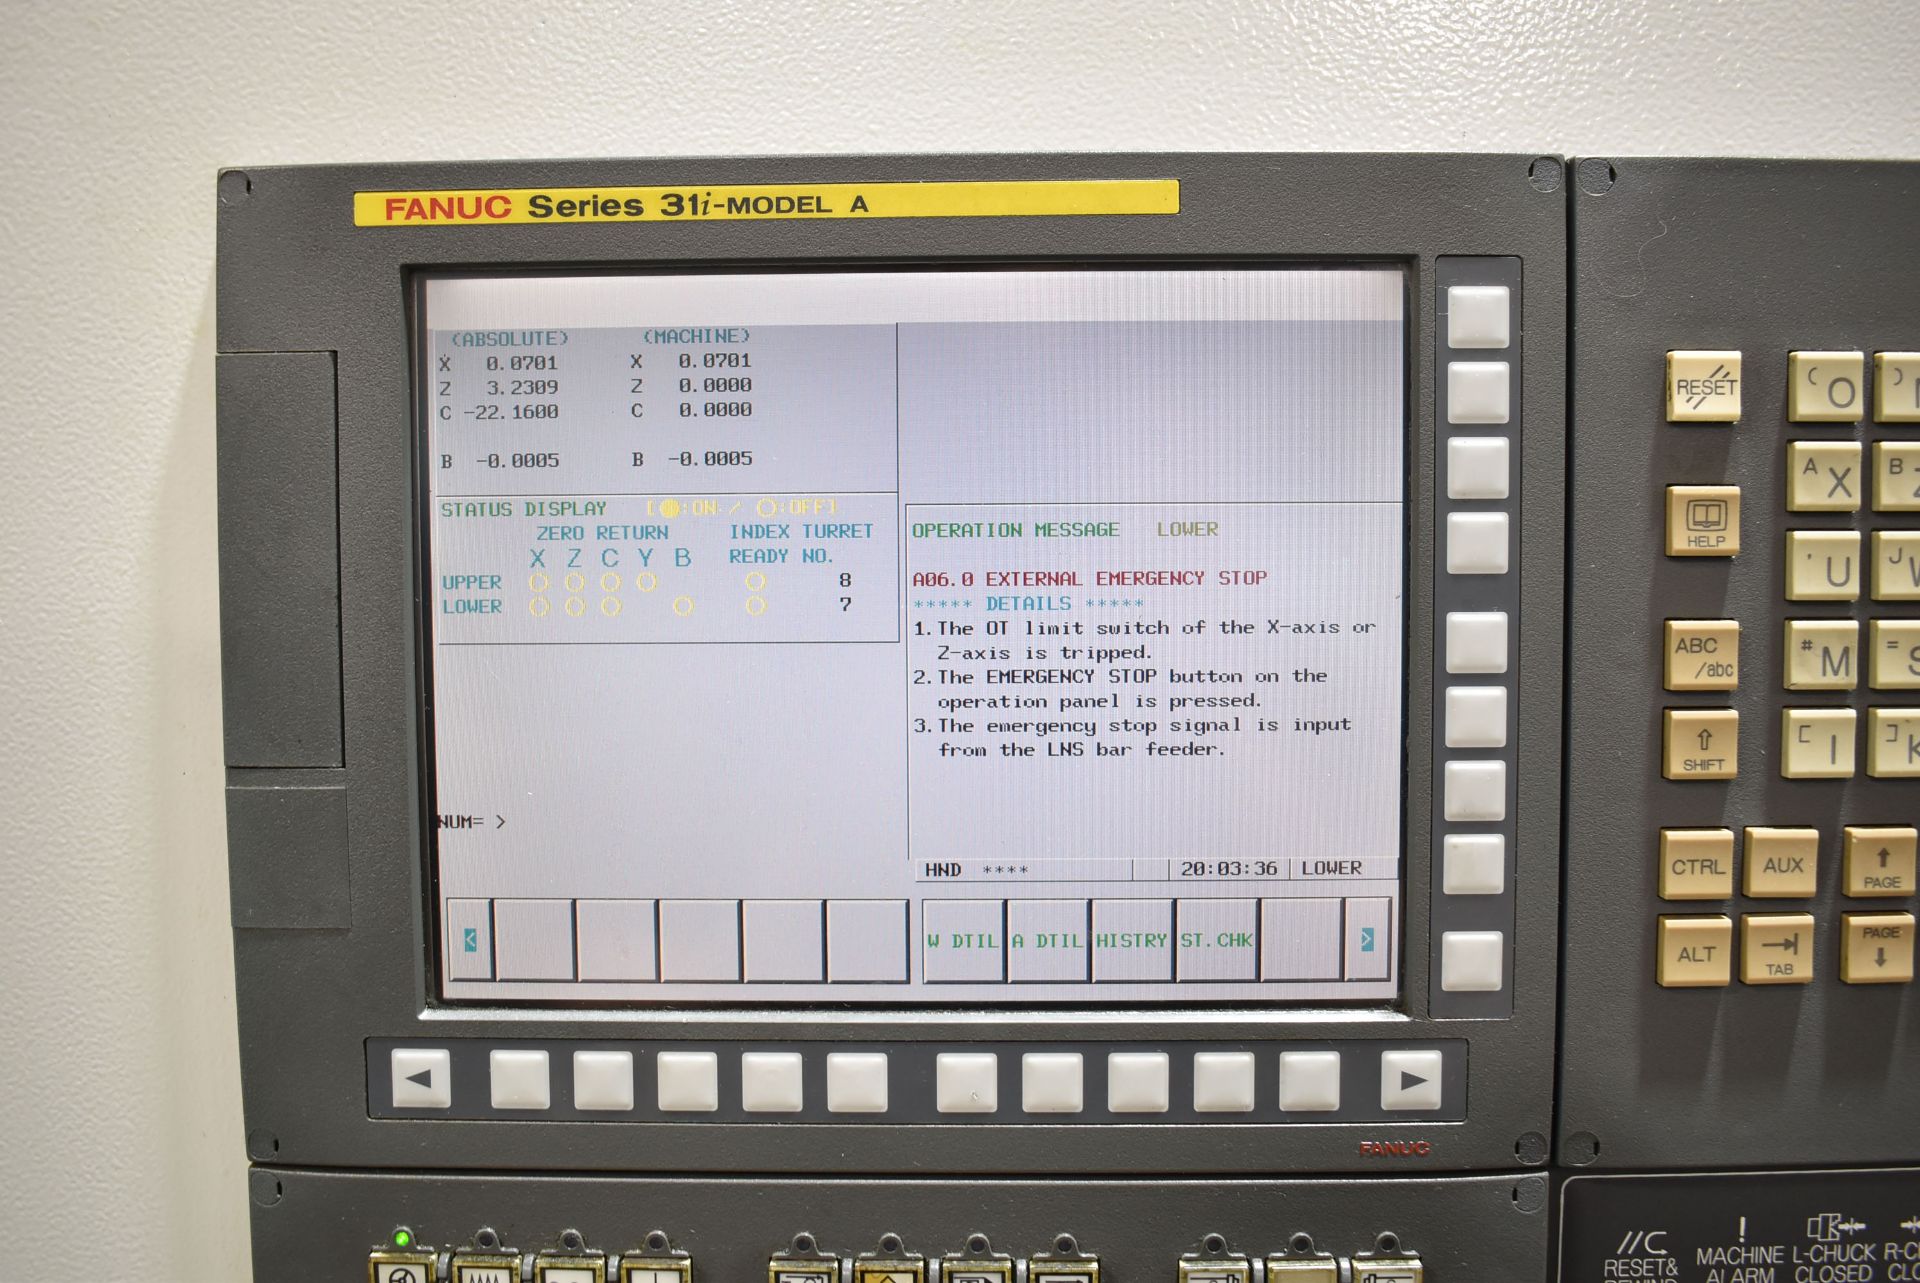 NAKAMURA-TOME (2005) WT-100 MMYS MULTI-AXIS OPPOSED SPINDLE AND TWIN TURRET CNC MULTI-TASKING CENTER - Image 9 of 17